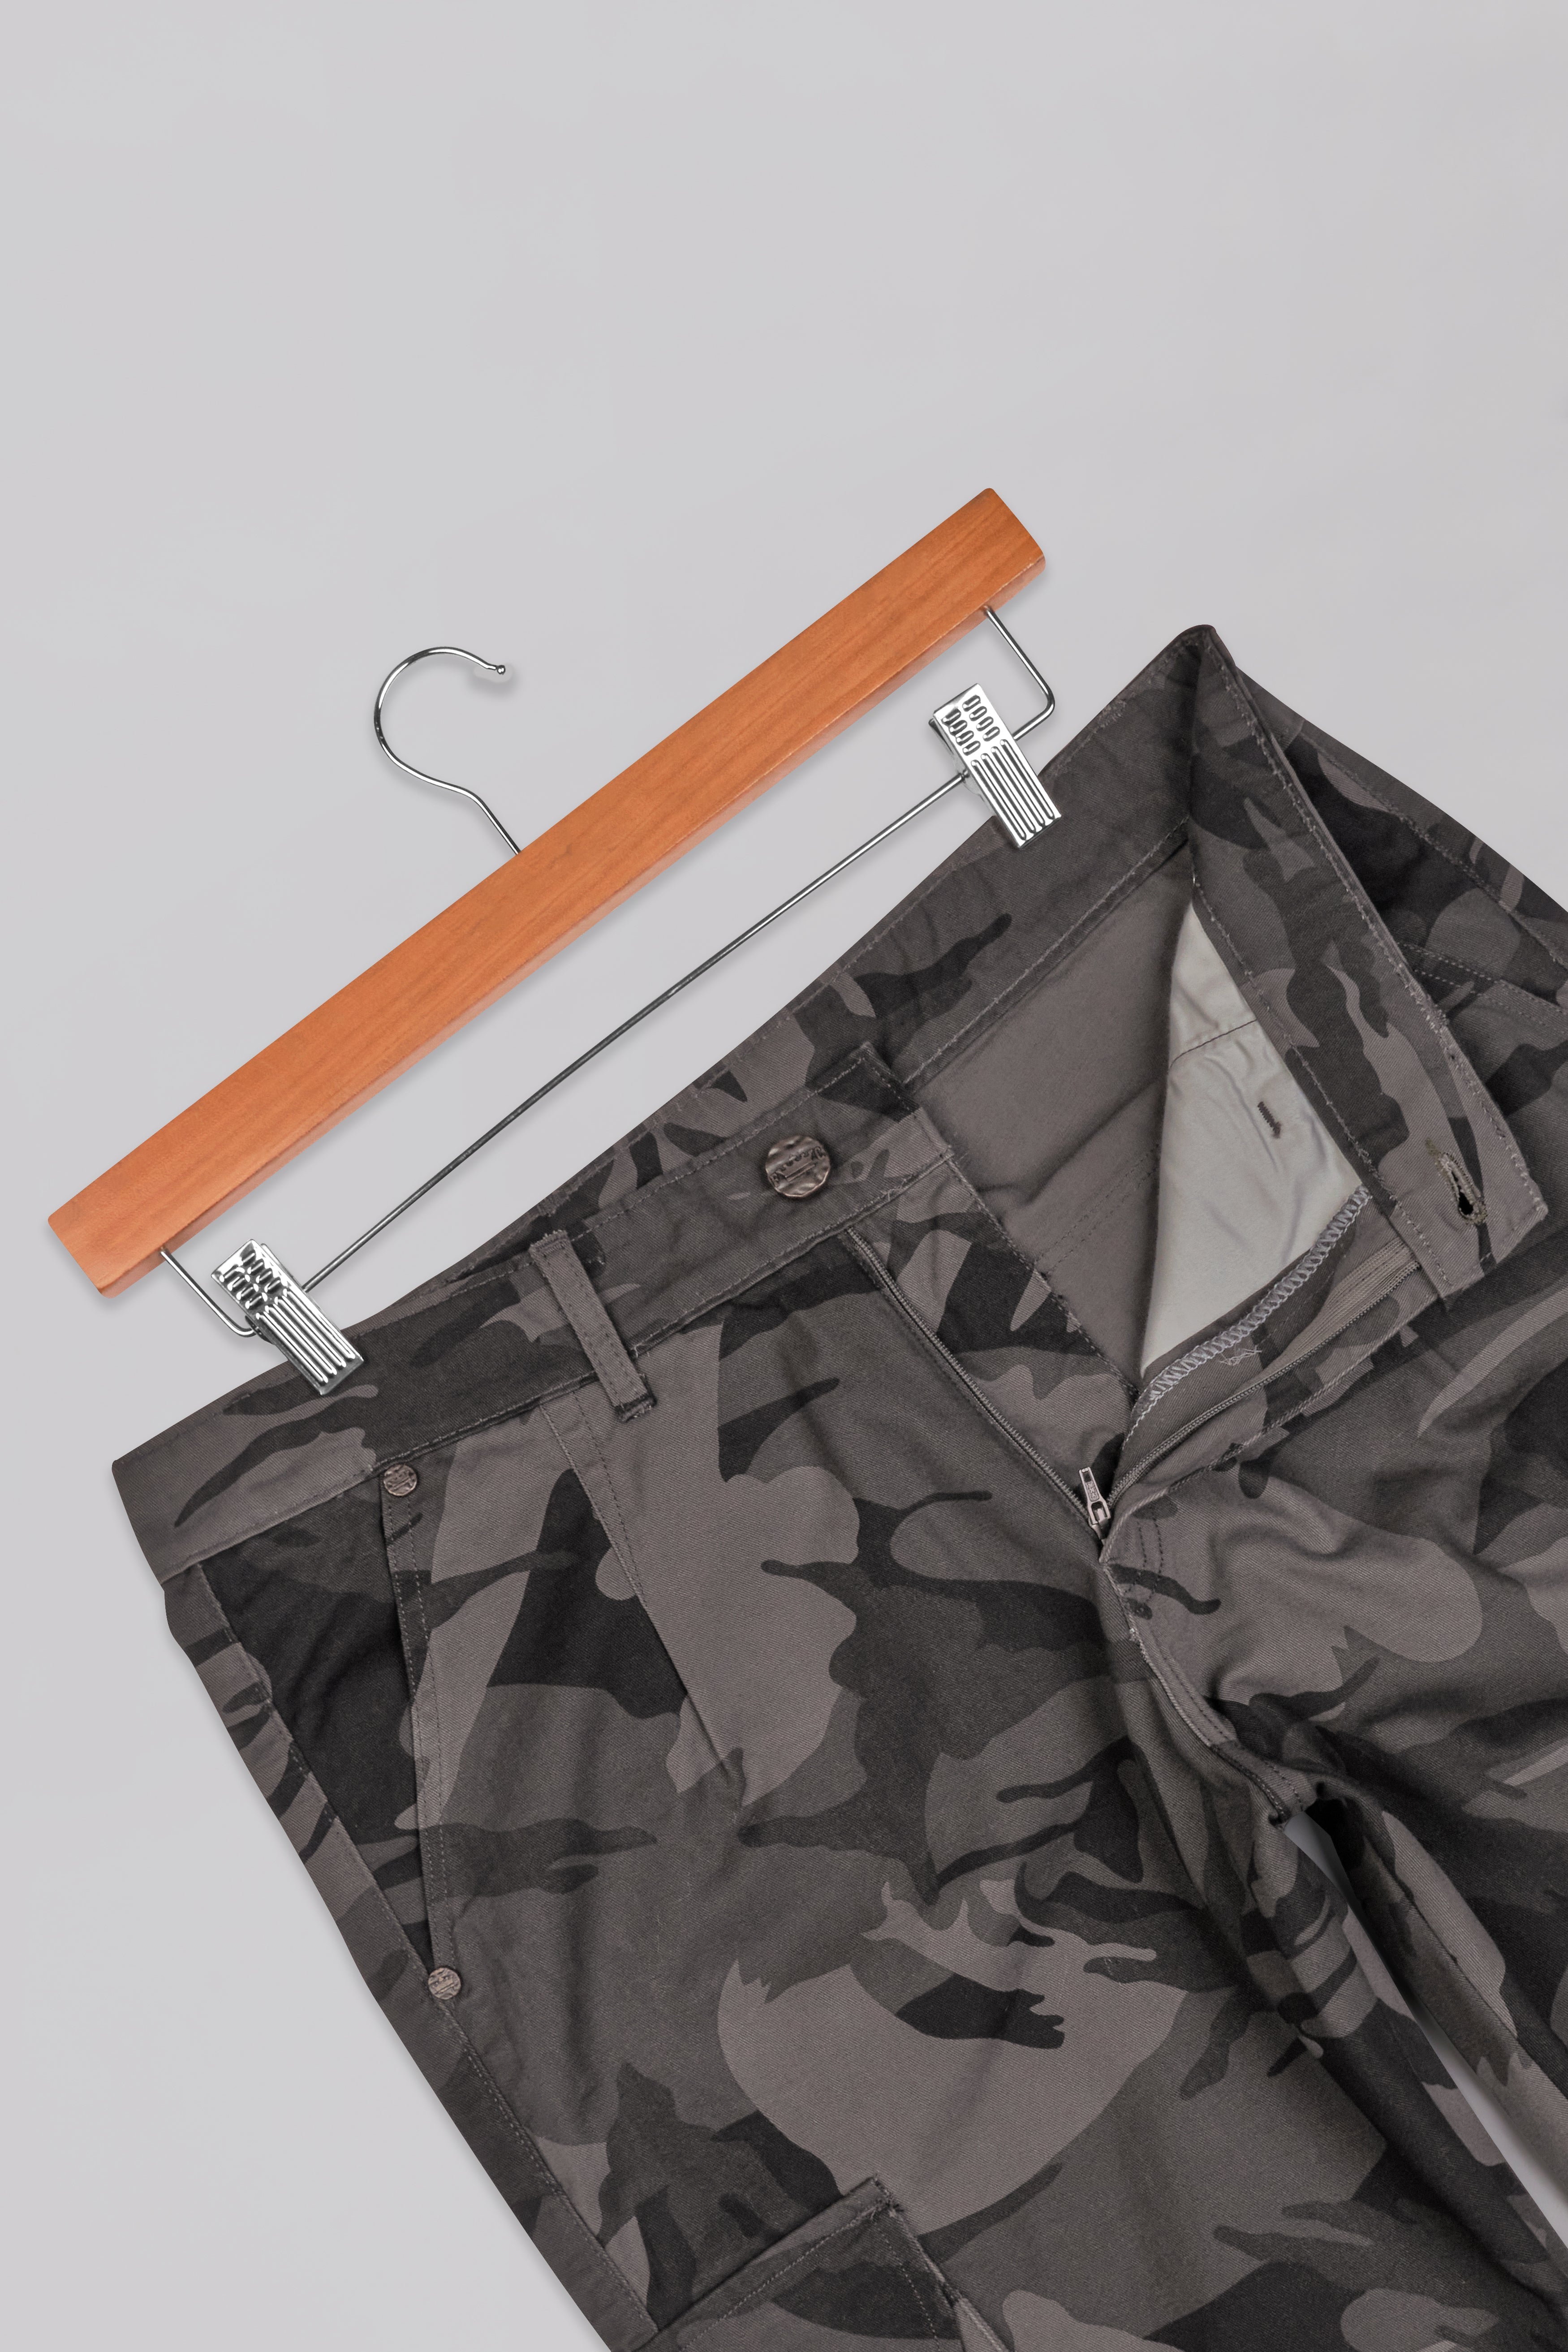 Scorpion Brown with Fuscous Green Camouflage Cargo Shorts SR278-28, SR278-30, SR278-32, SR278-34, SR278-36, SR278-38, SR278-40, SR278-42, SR278-44